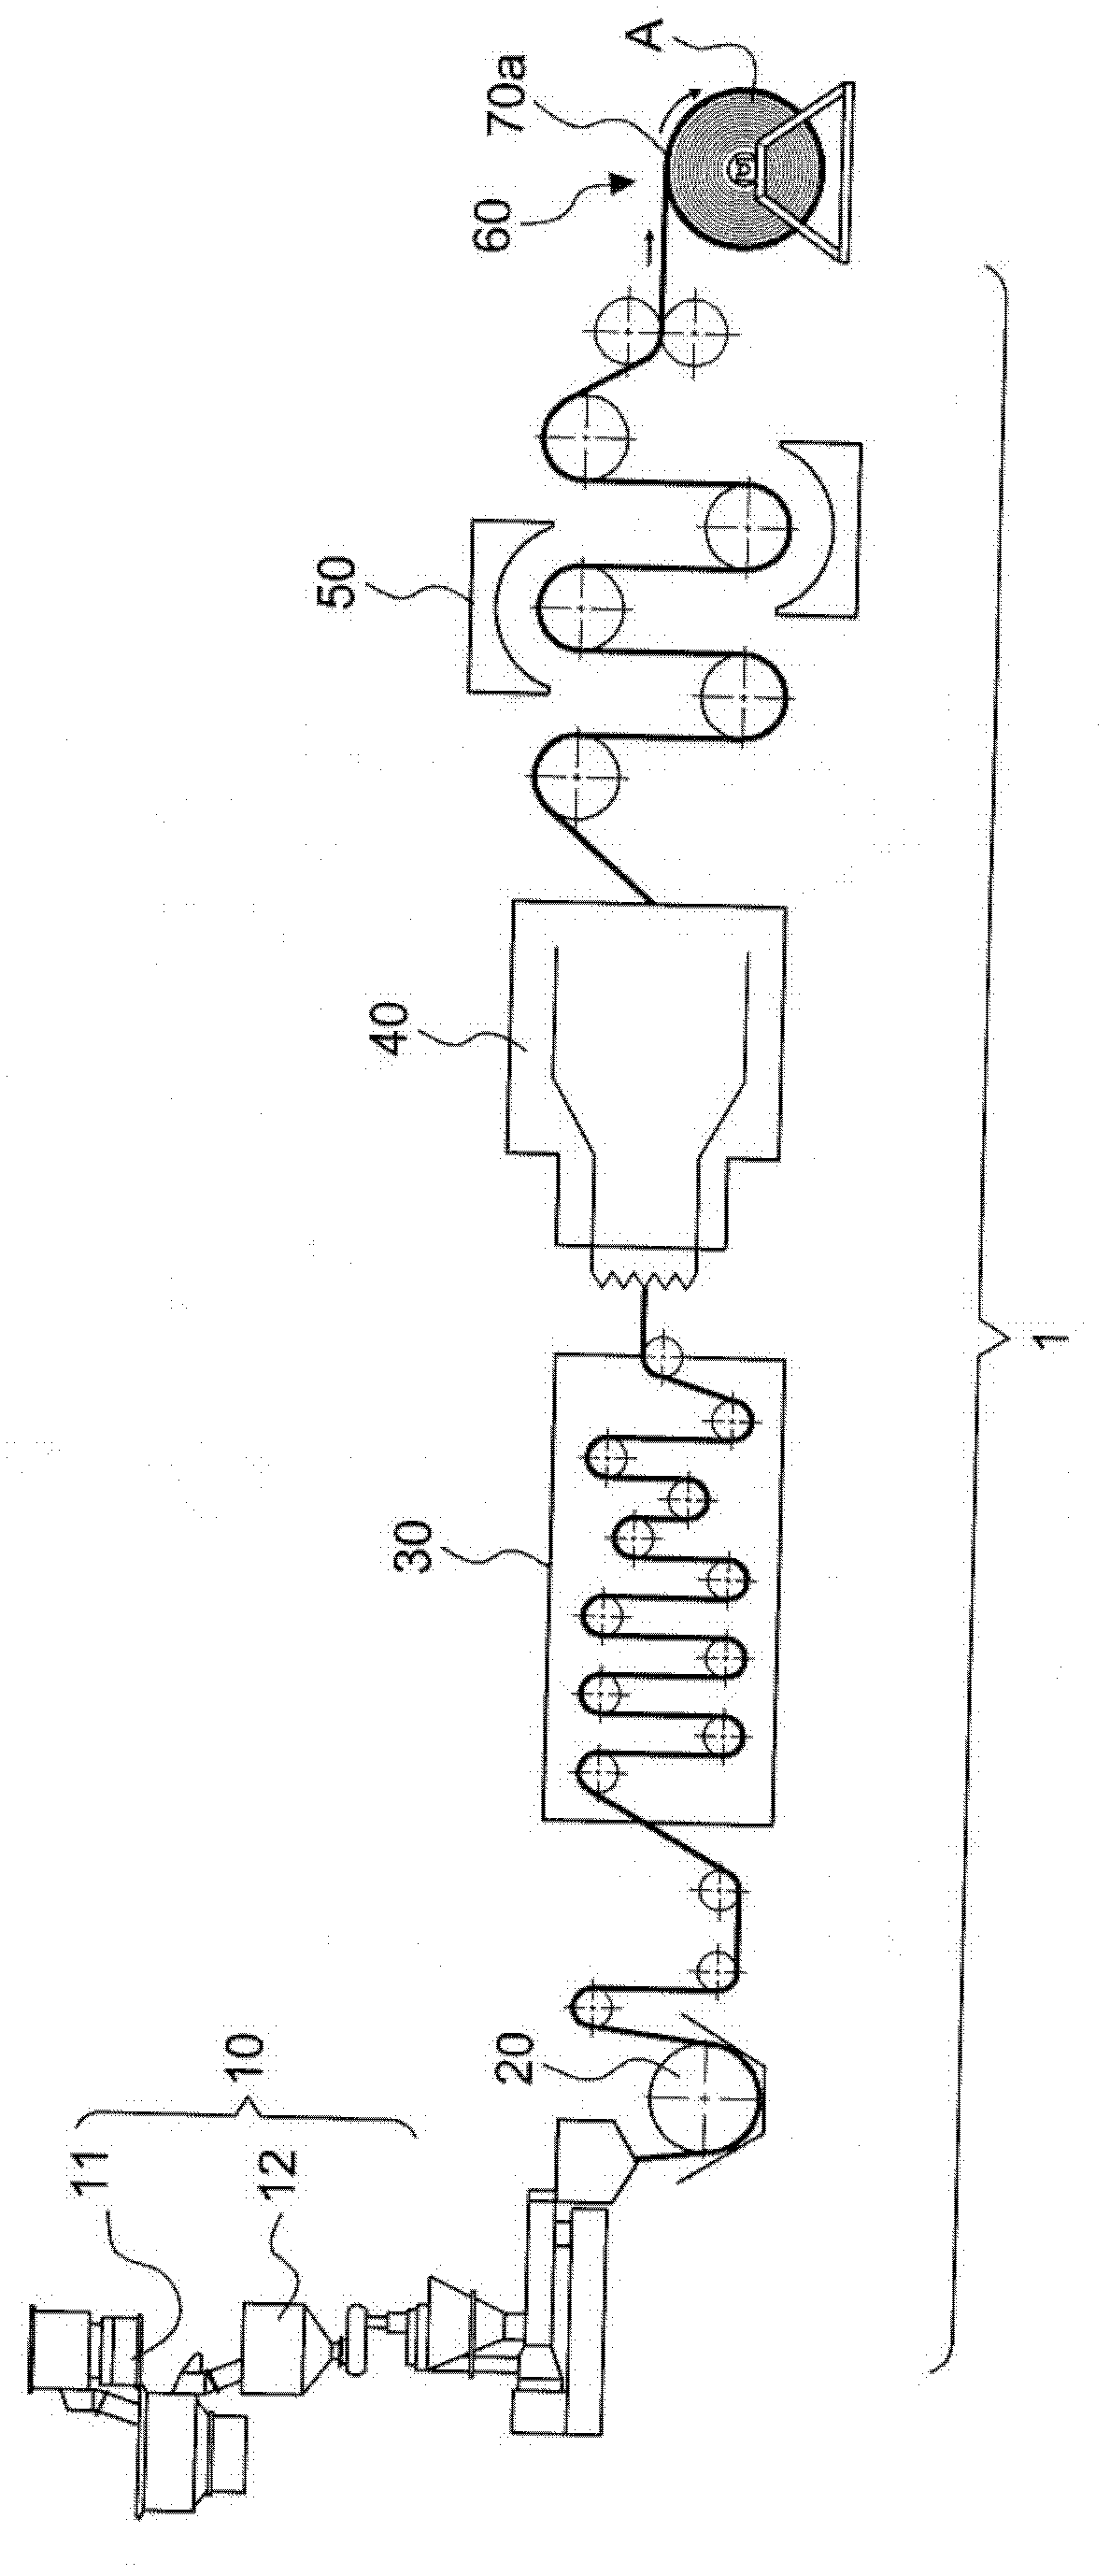 Integrated processing device of in-plant production of surface-coated and modified BOPP (Biaxially Oriented Polypropylene) synthetic paper